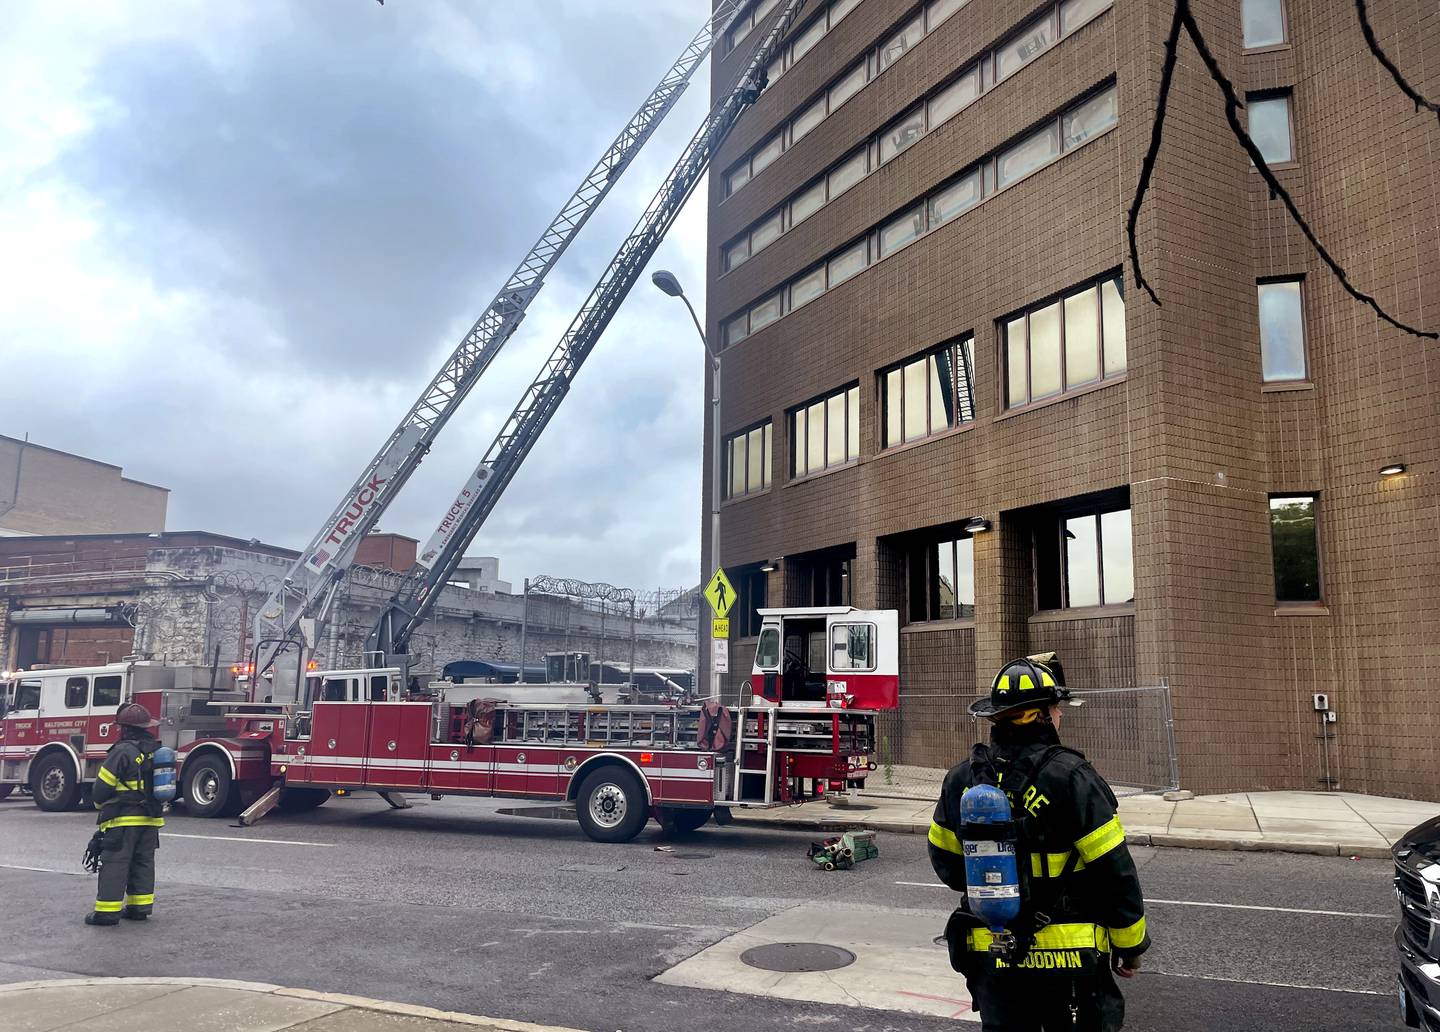 Firefighters respond to a fire at the Maryland Reception, Reception, Diagnostic and Classification Center located at 550 E Madison St.